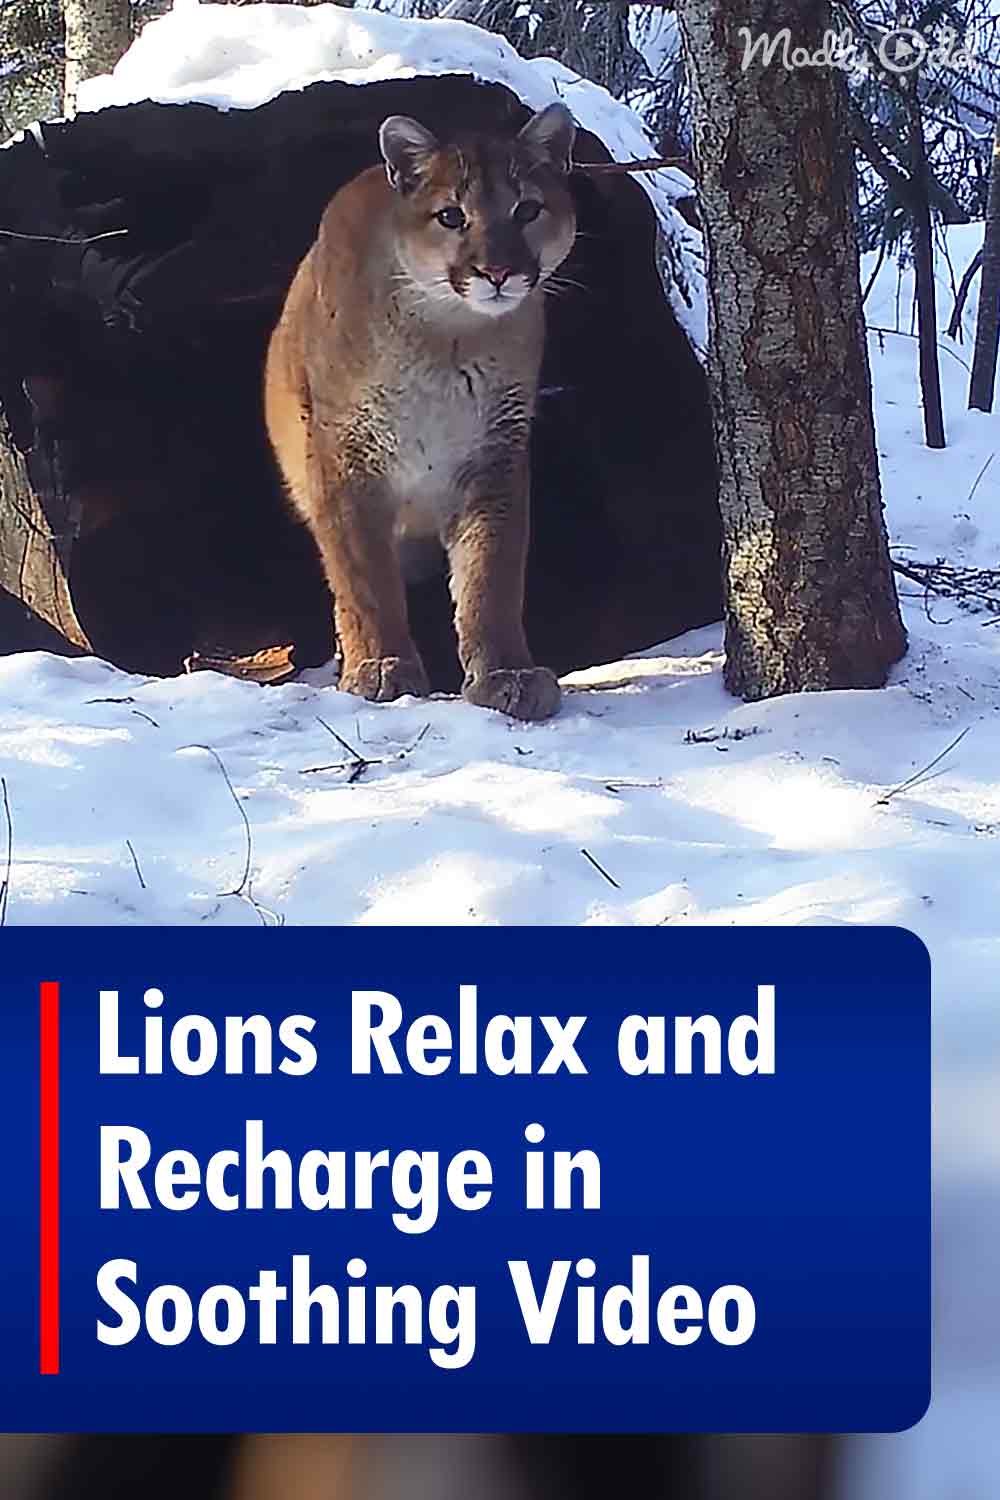 Lions Relax and Recharge in Soothing Video